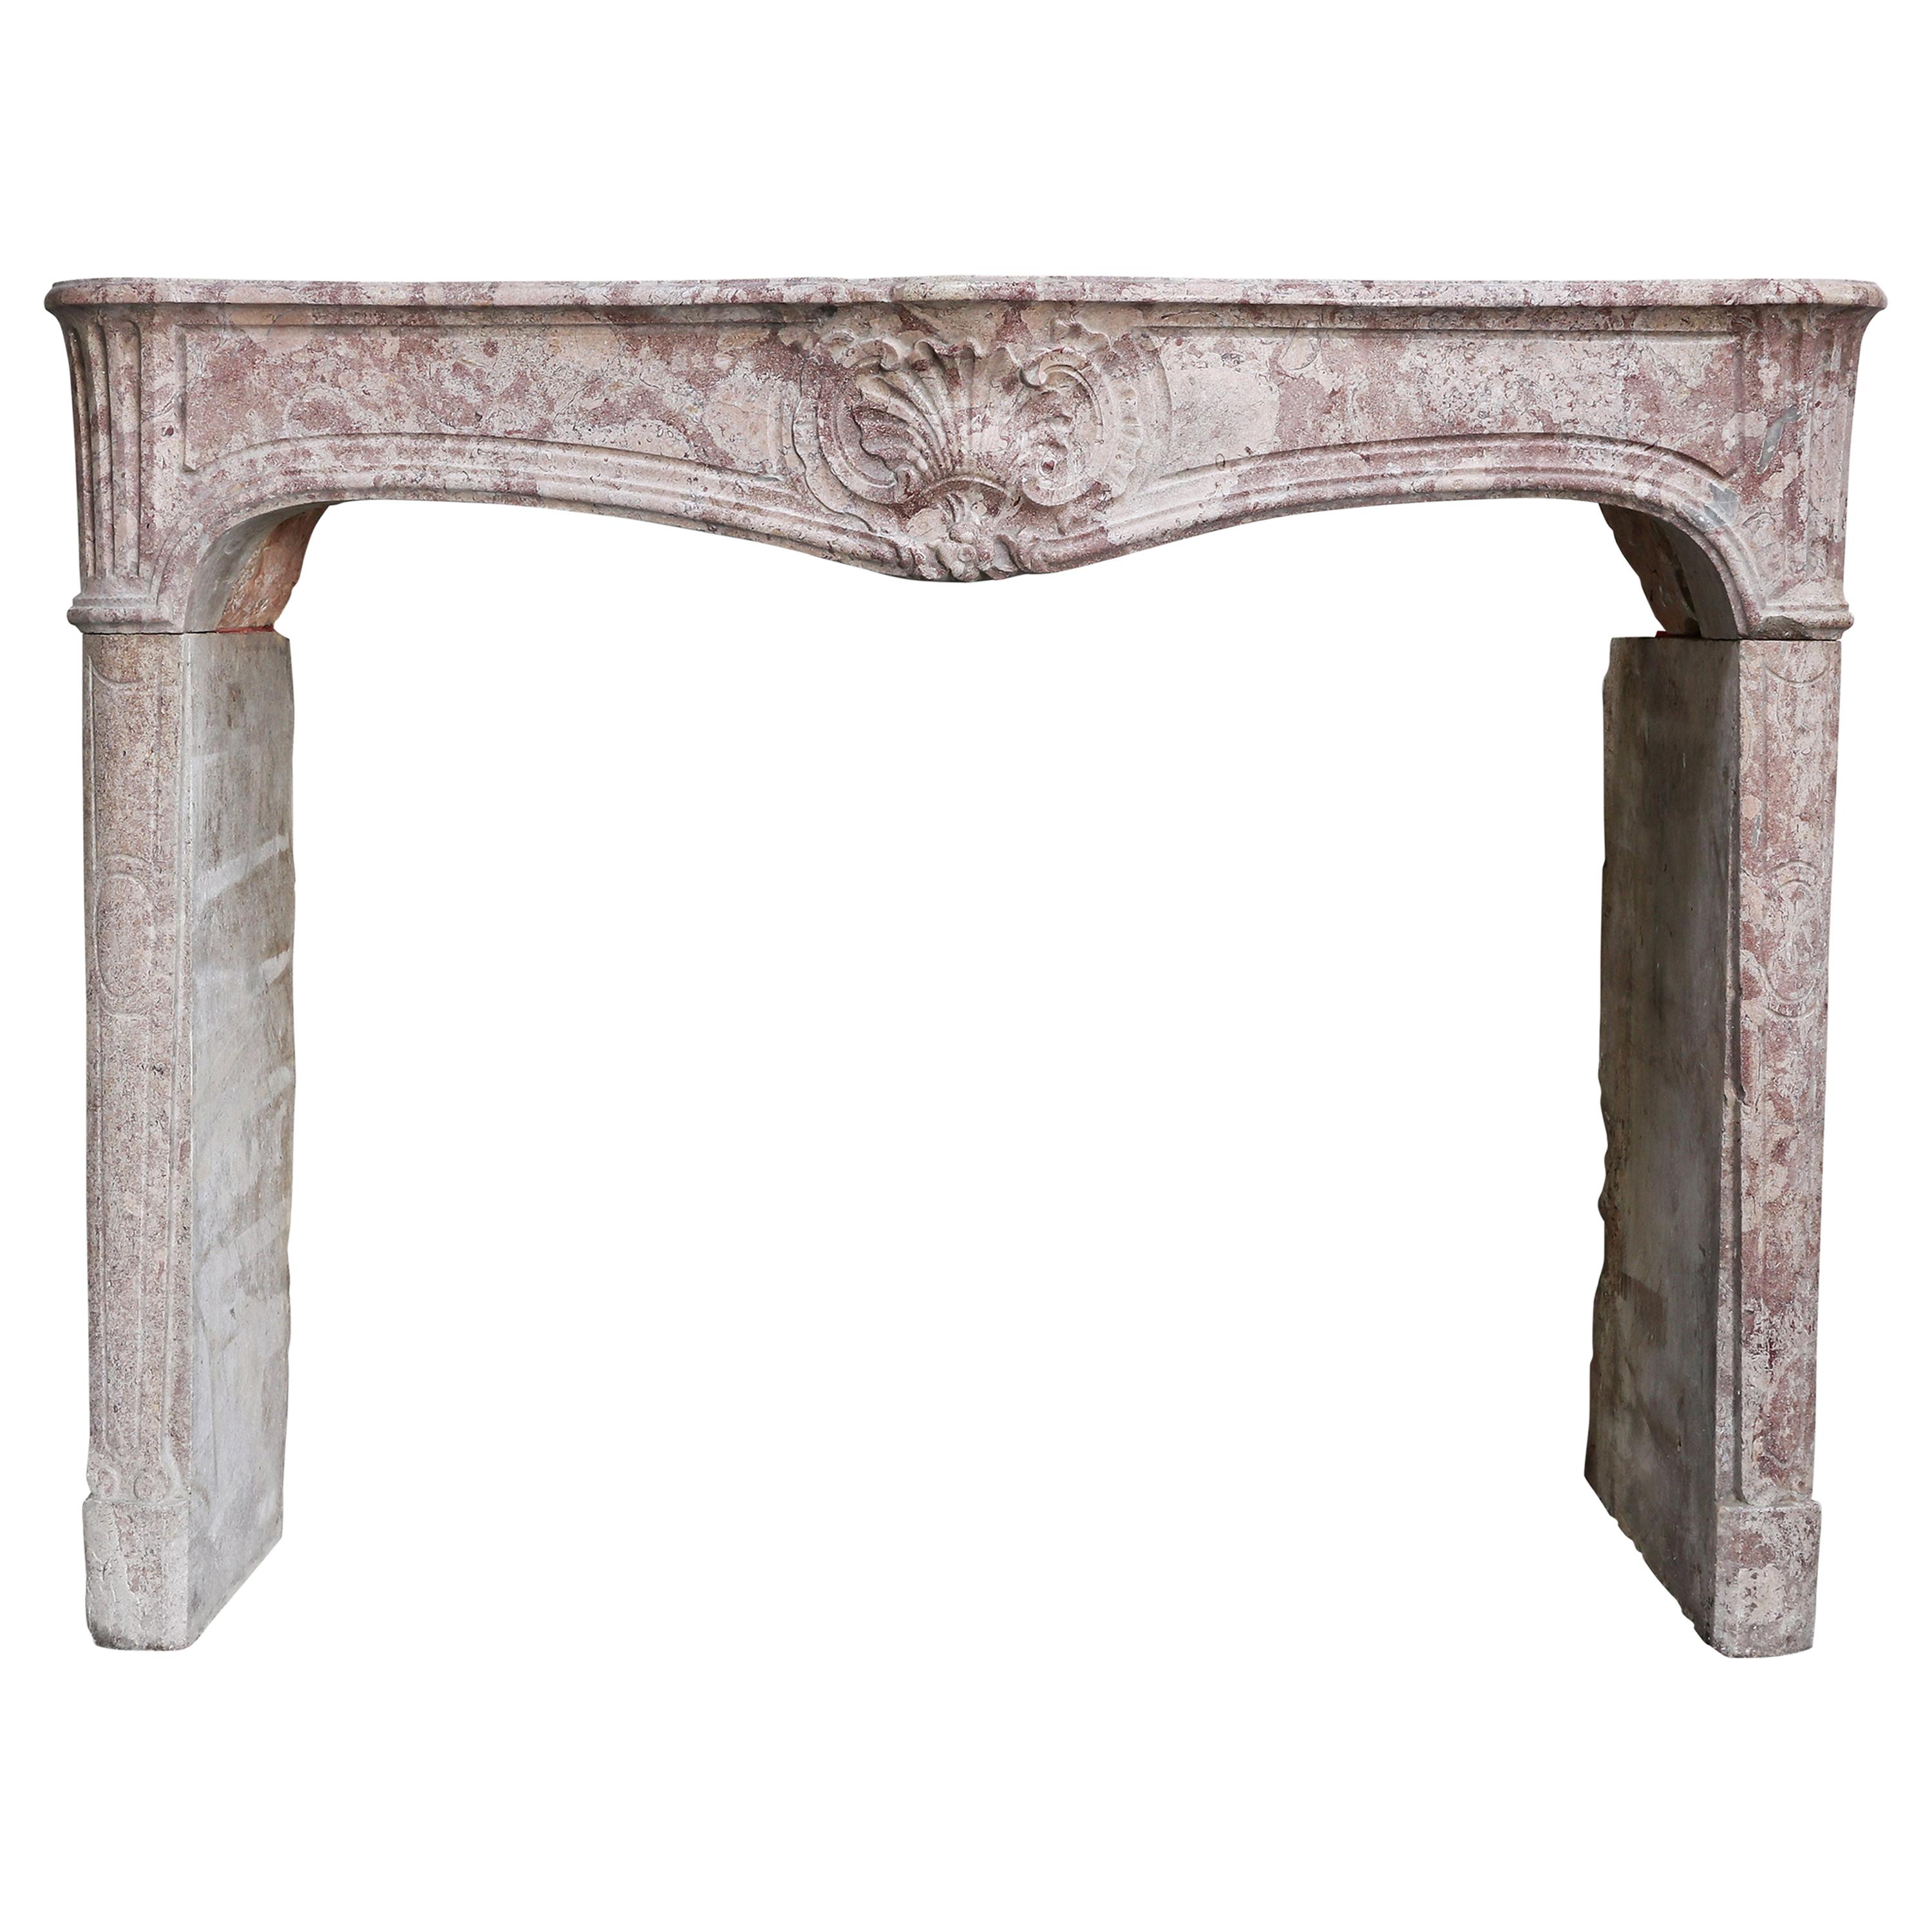 19th Century Antique Fireplace in Style of Louis XV For Sale